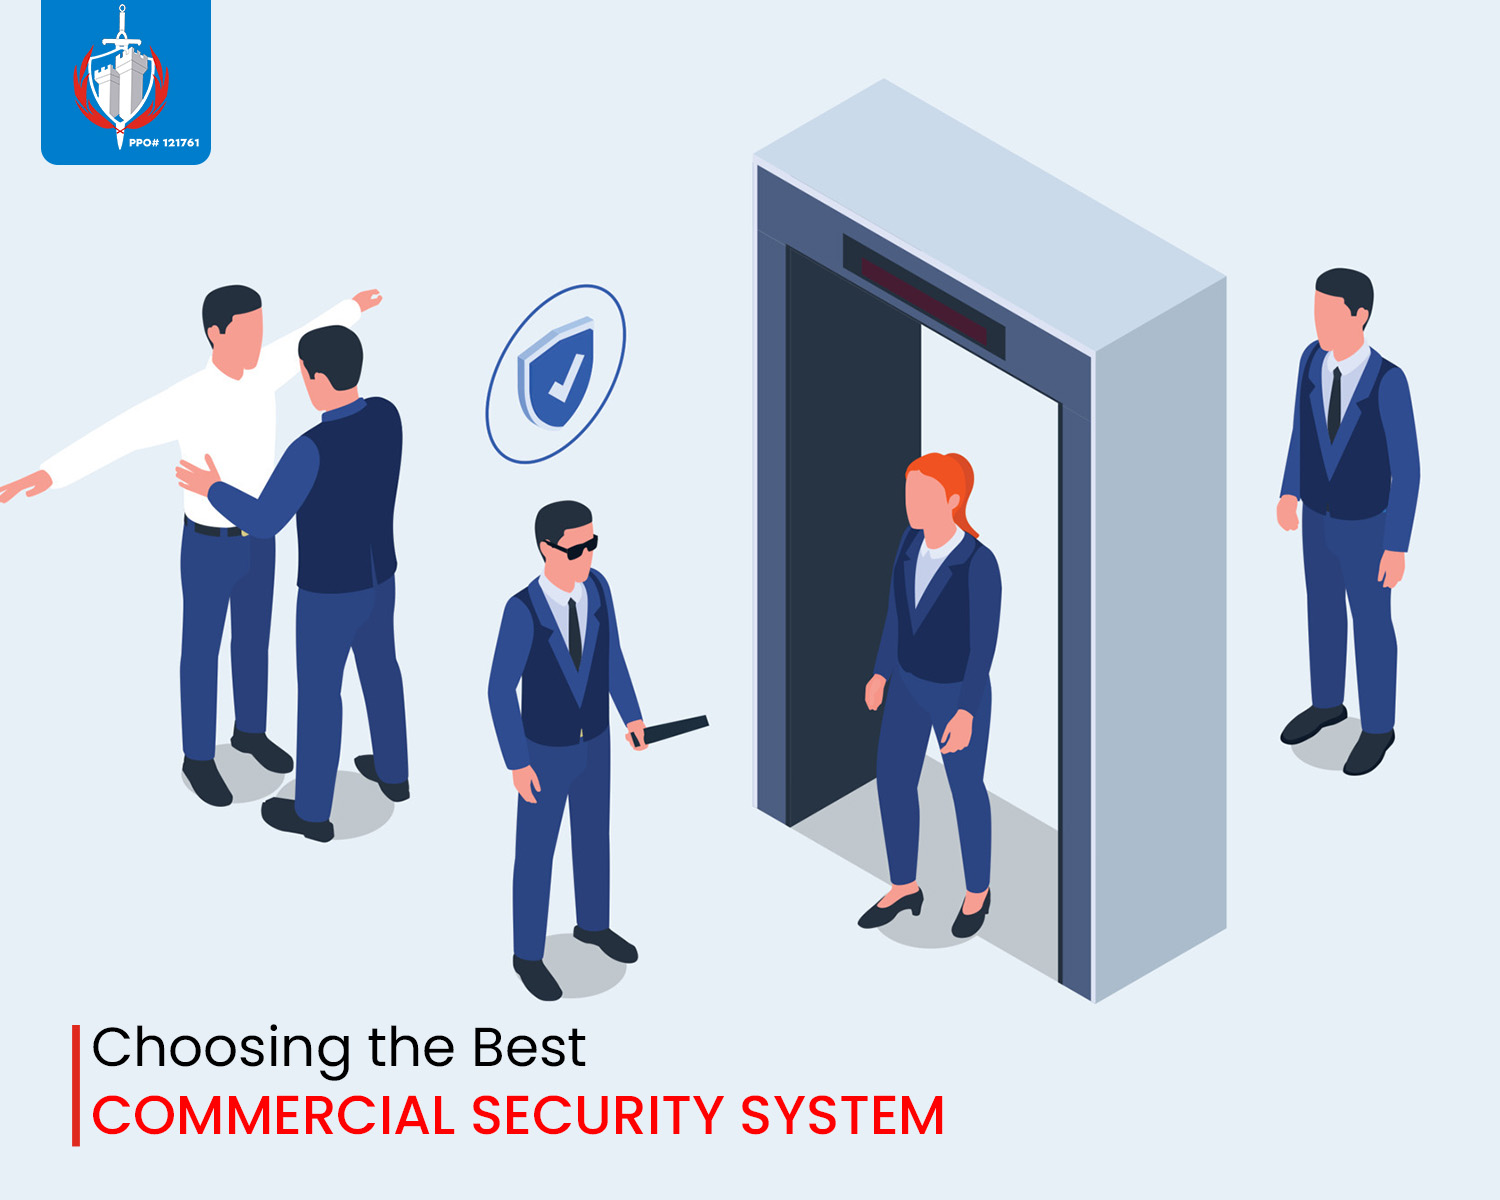 Choosing the Best Commercial Security System: